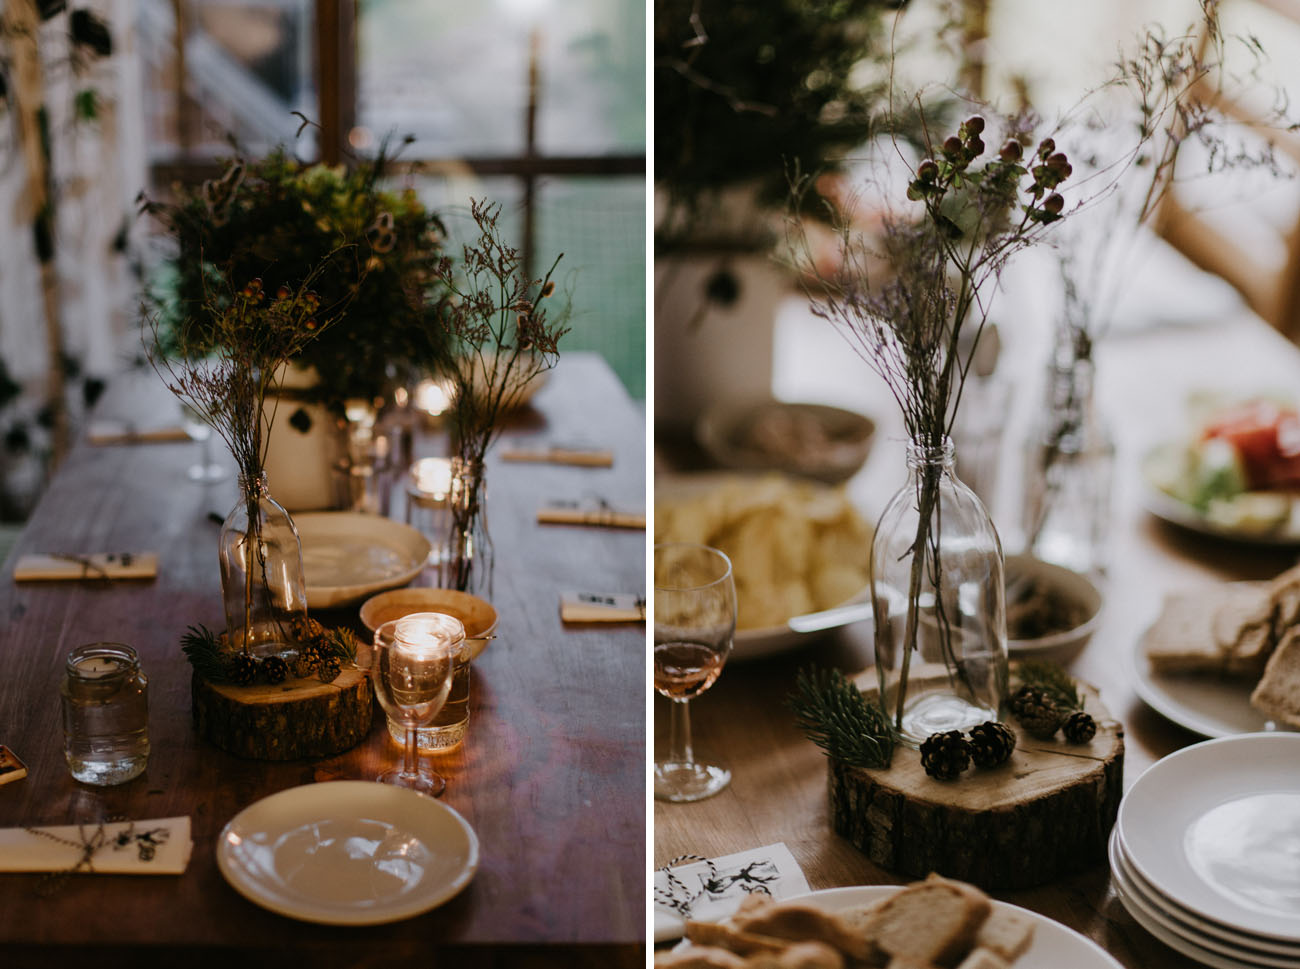 The table decor was also forest-inspired and mountain-inspired